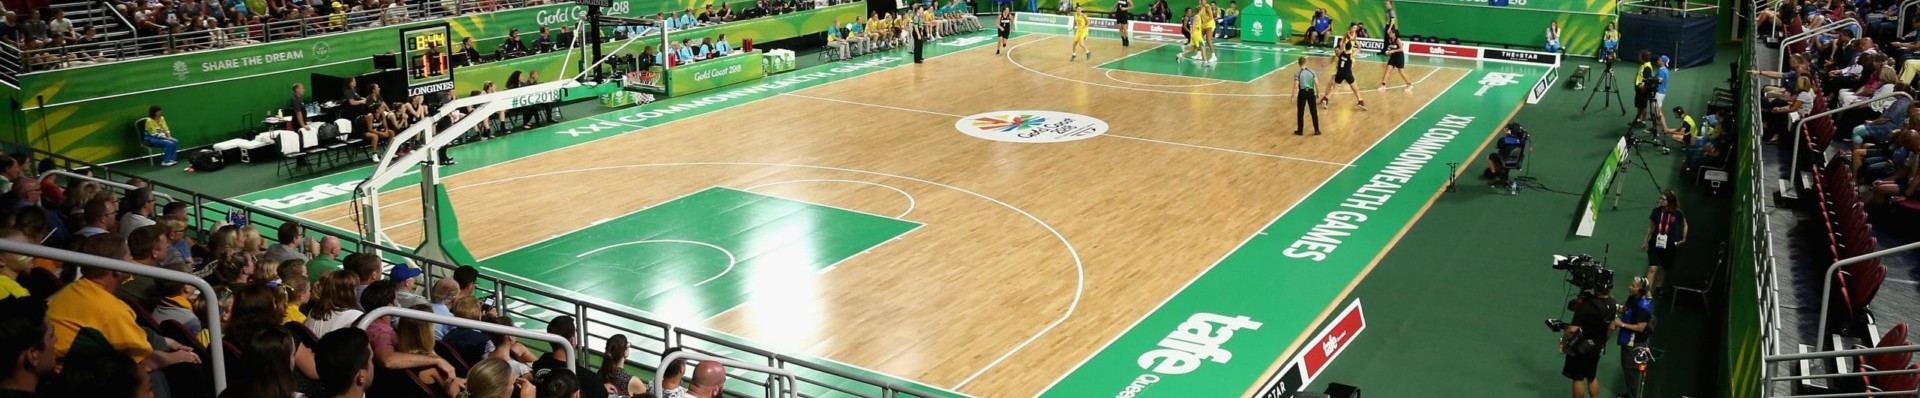 2018 Gold Coast Commonwealth Games Day 9: Basketball